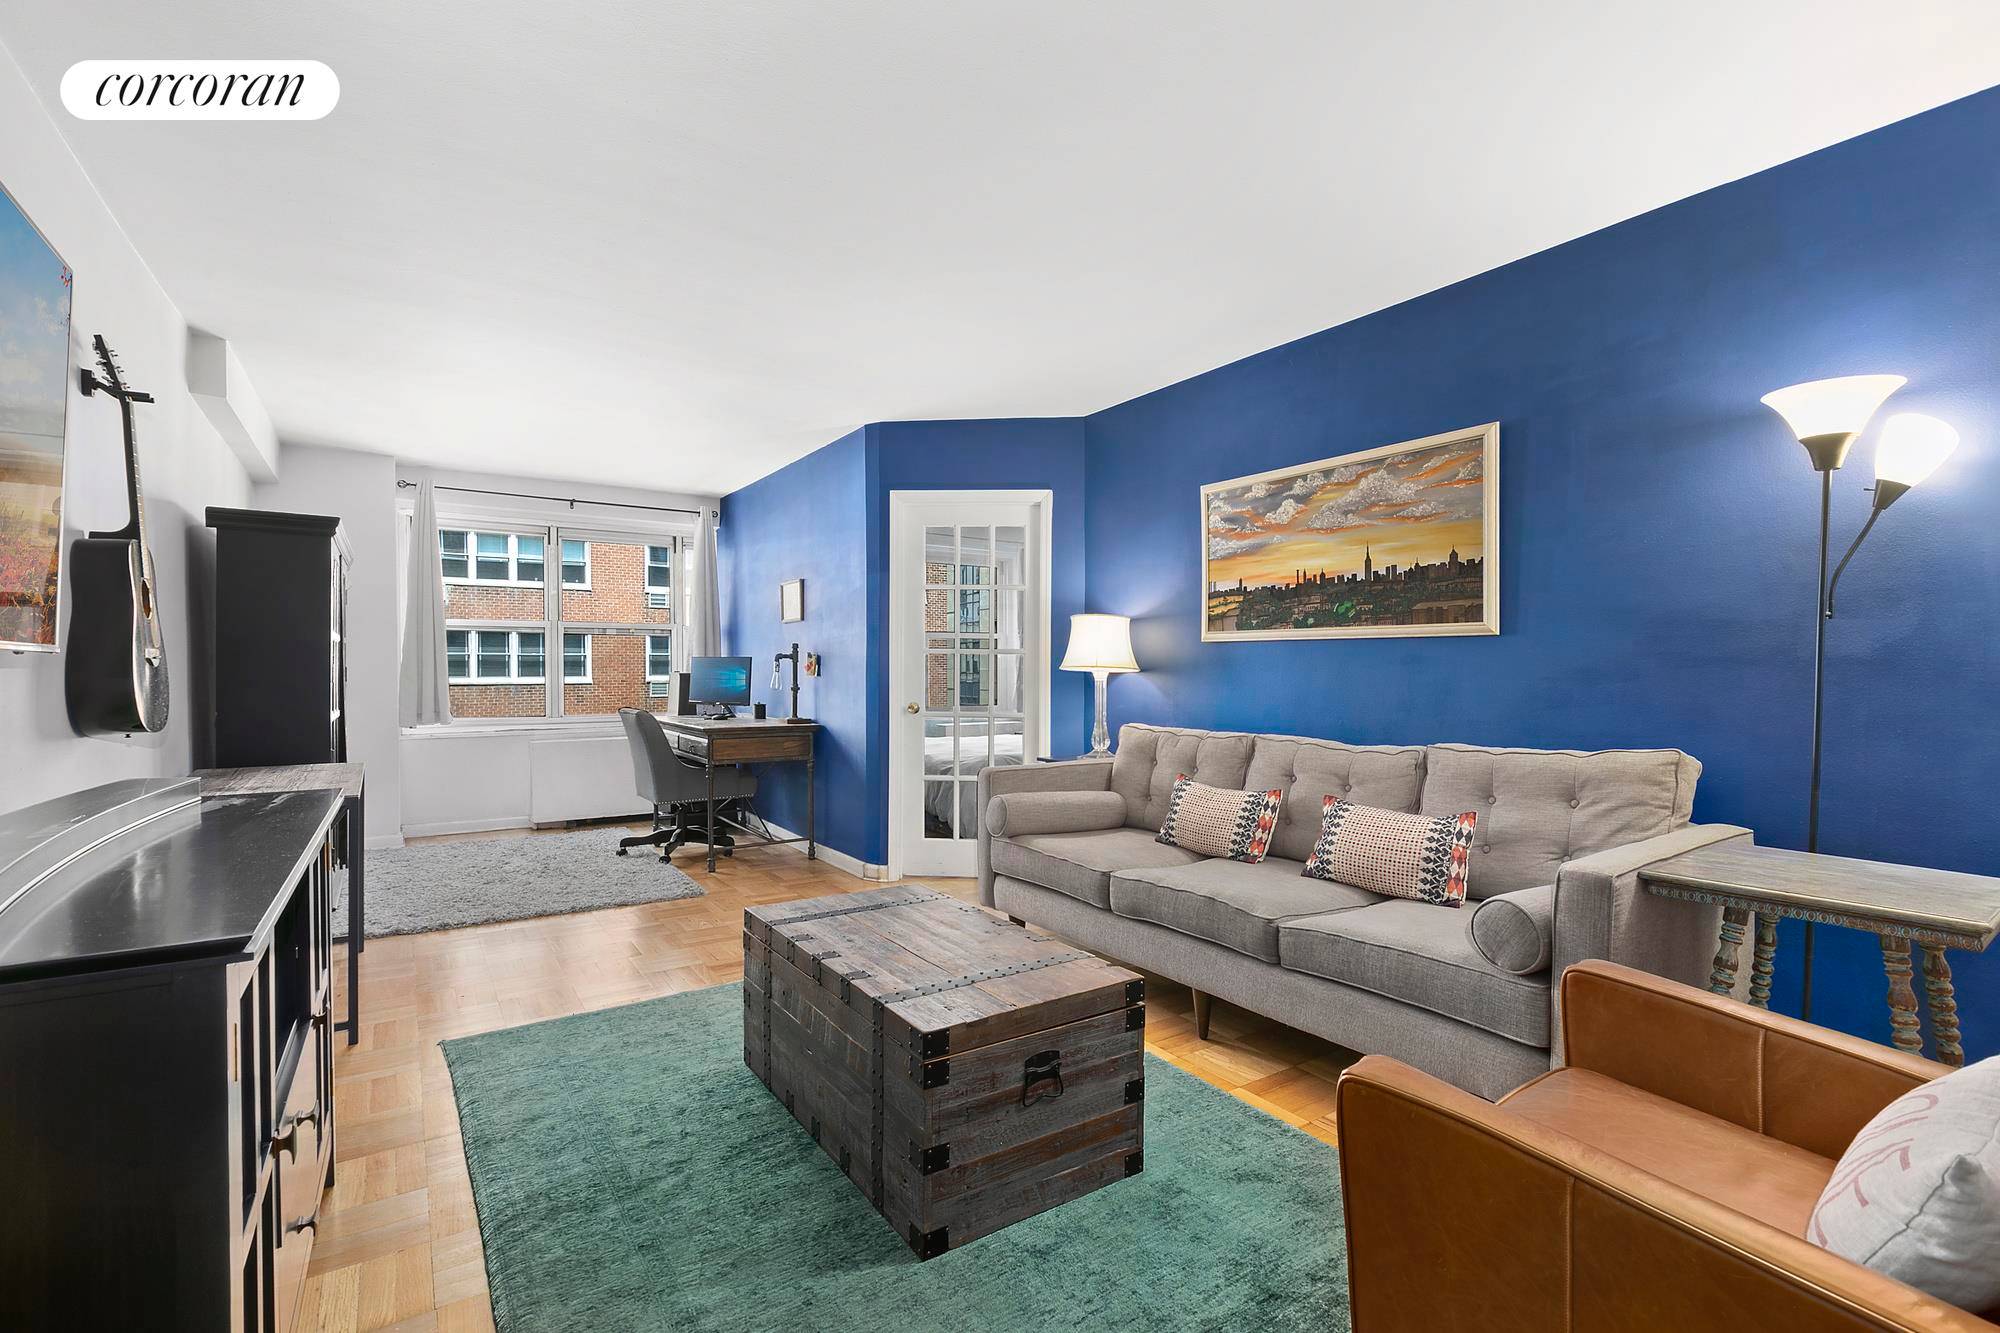 OPEN HOUSE SUNDAY BY APPOINTMENTEnjoy large living spaces and excellent storage in this one bedroom, one bath home in one of New York City's best neighborhoods.